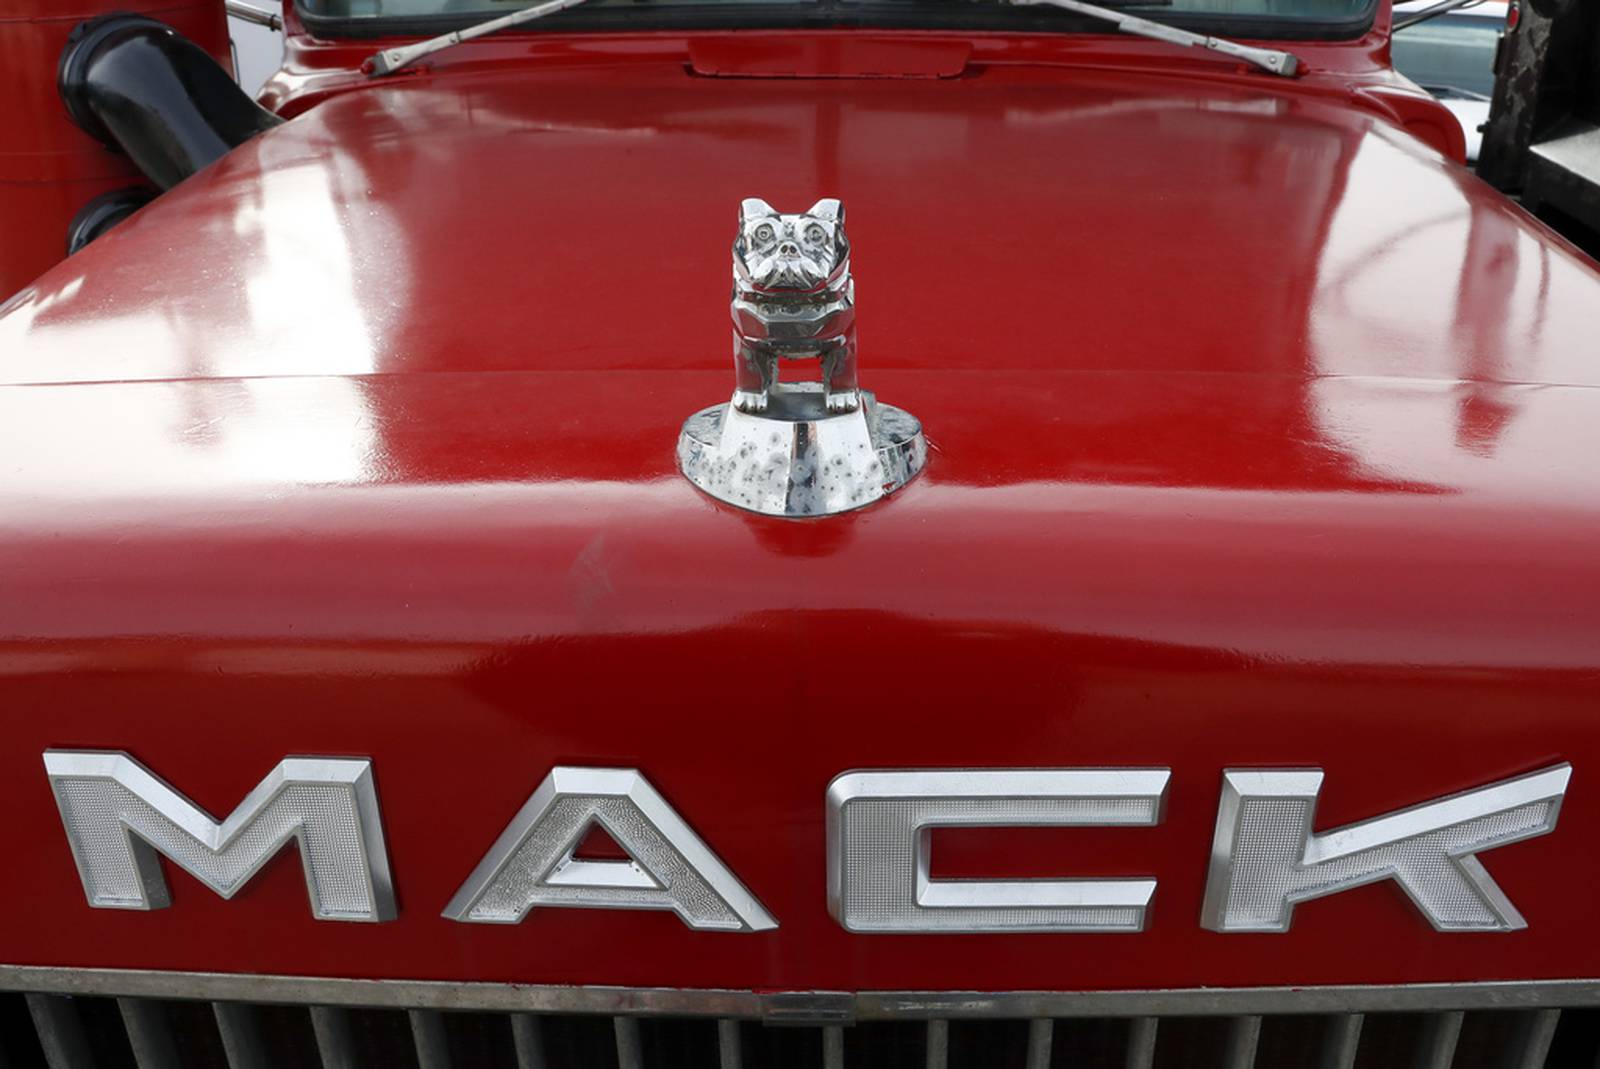 UAW reaches tentative contract agreement with Mack Trucks 9&10 News